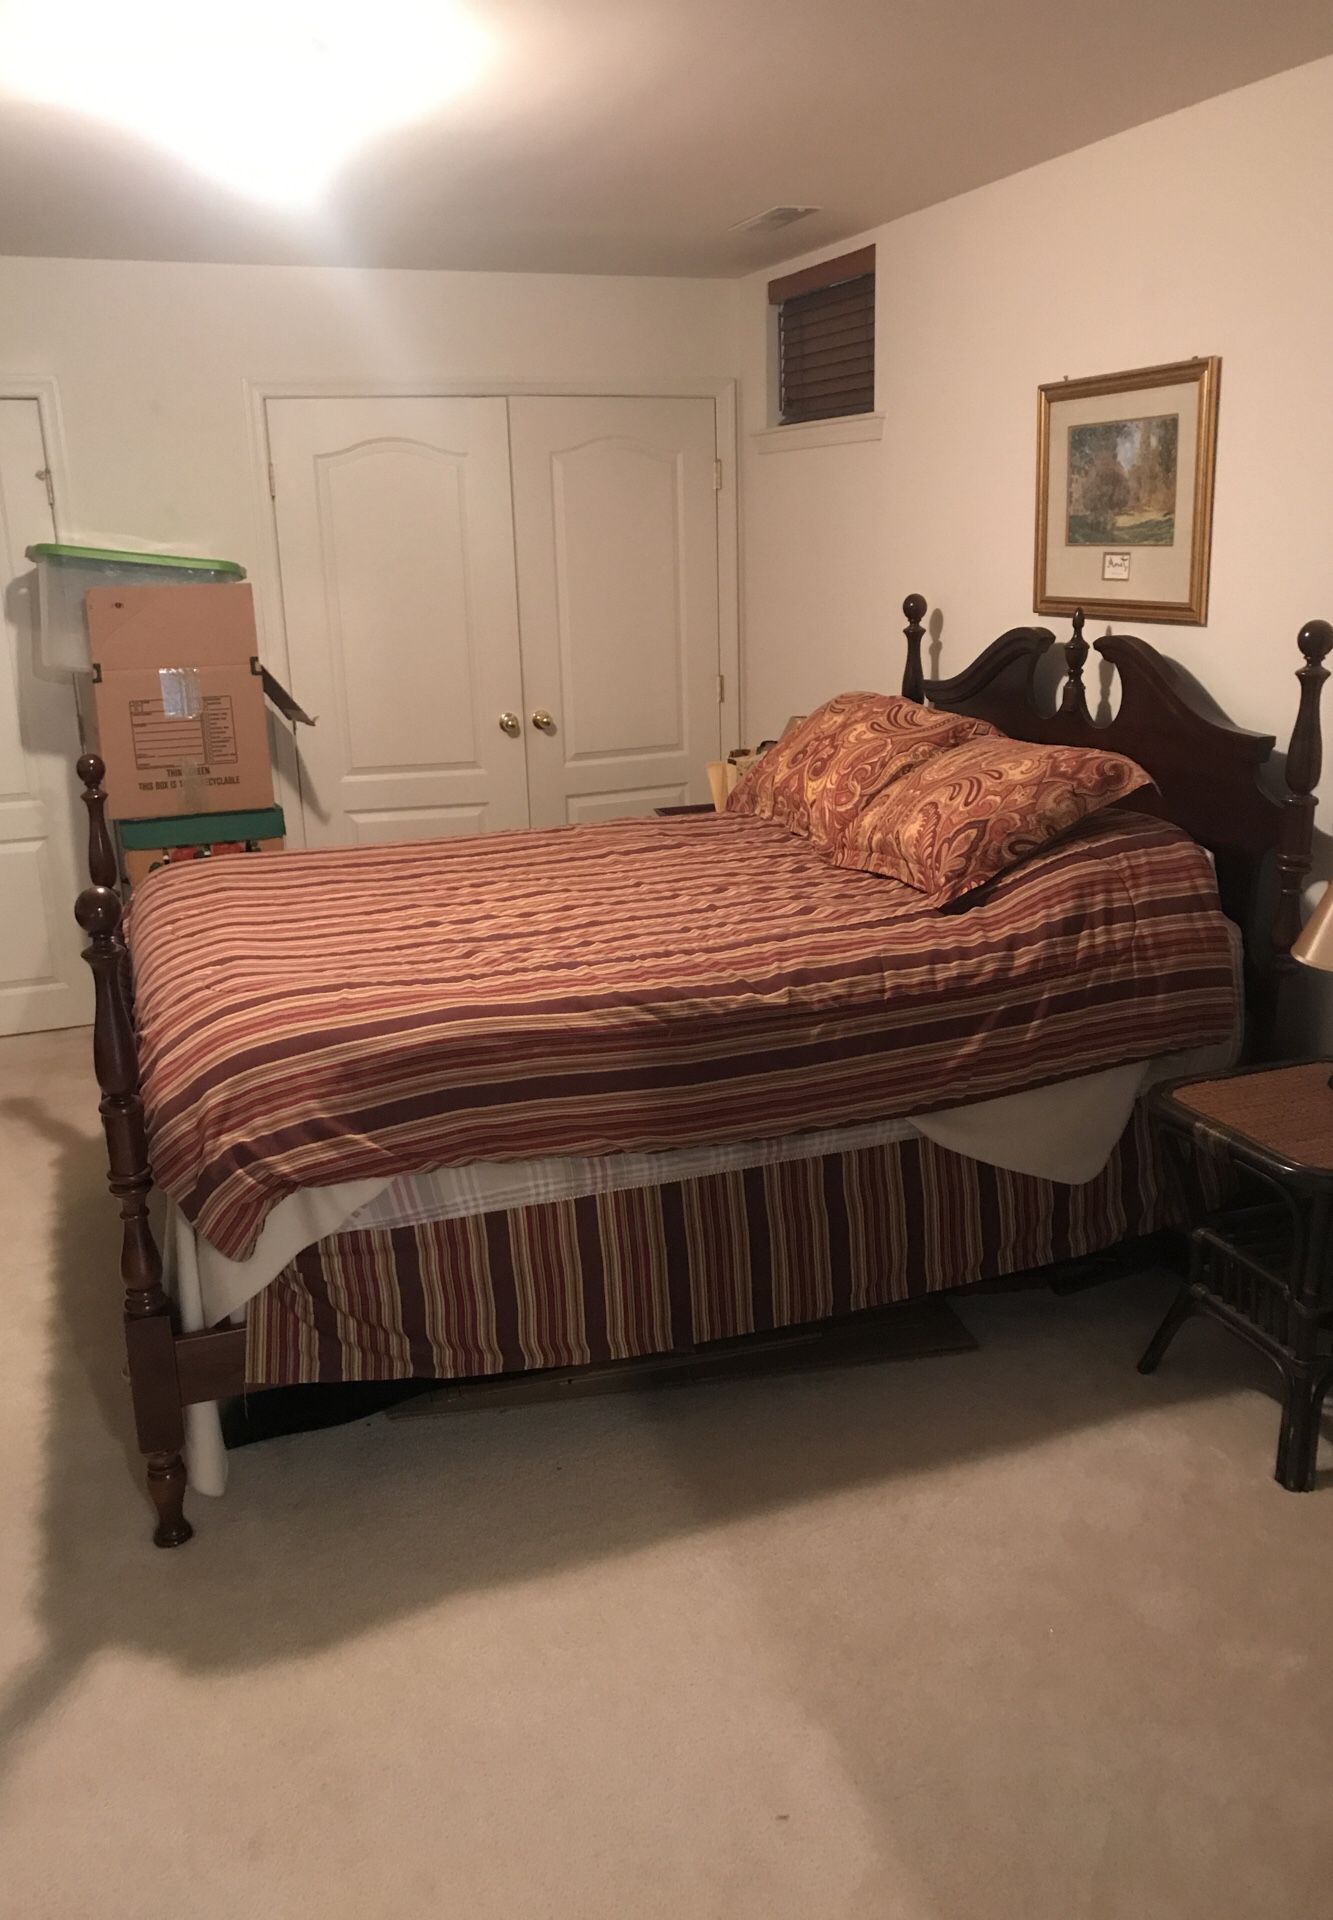 Bedroom Set Furniture Kincaid Solid Wood, Headboard, Footboard, Nightstand, Dresser and Mirror and Chest of Drawers. mattress not included